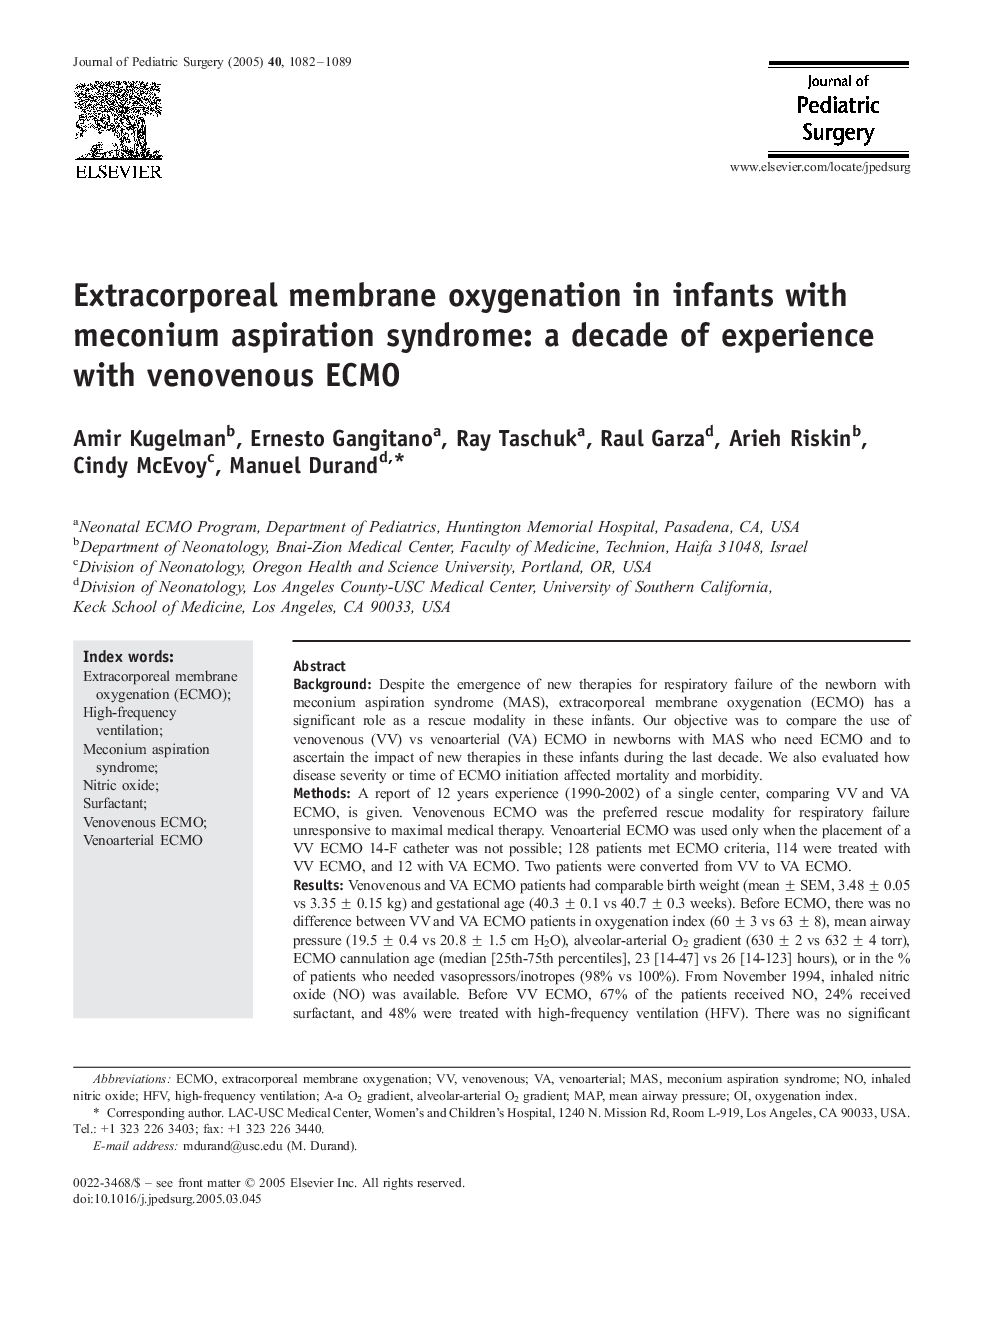 Extracorporeal membrane oxygenation in infants with meconium aspiration syndrome: a decade of experience with venovenous ECMO